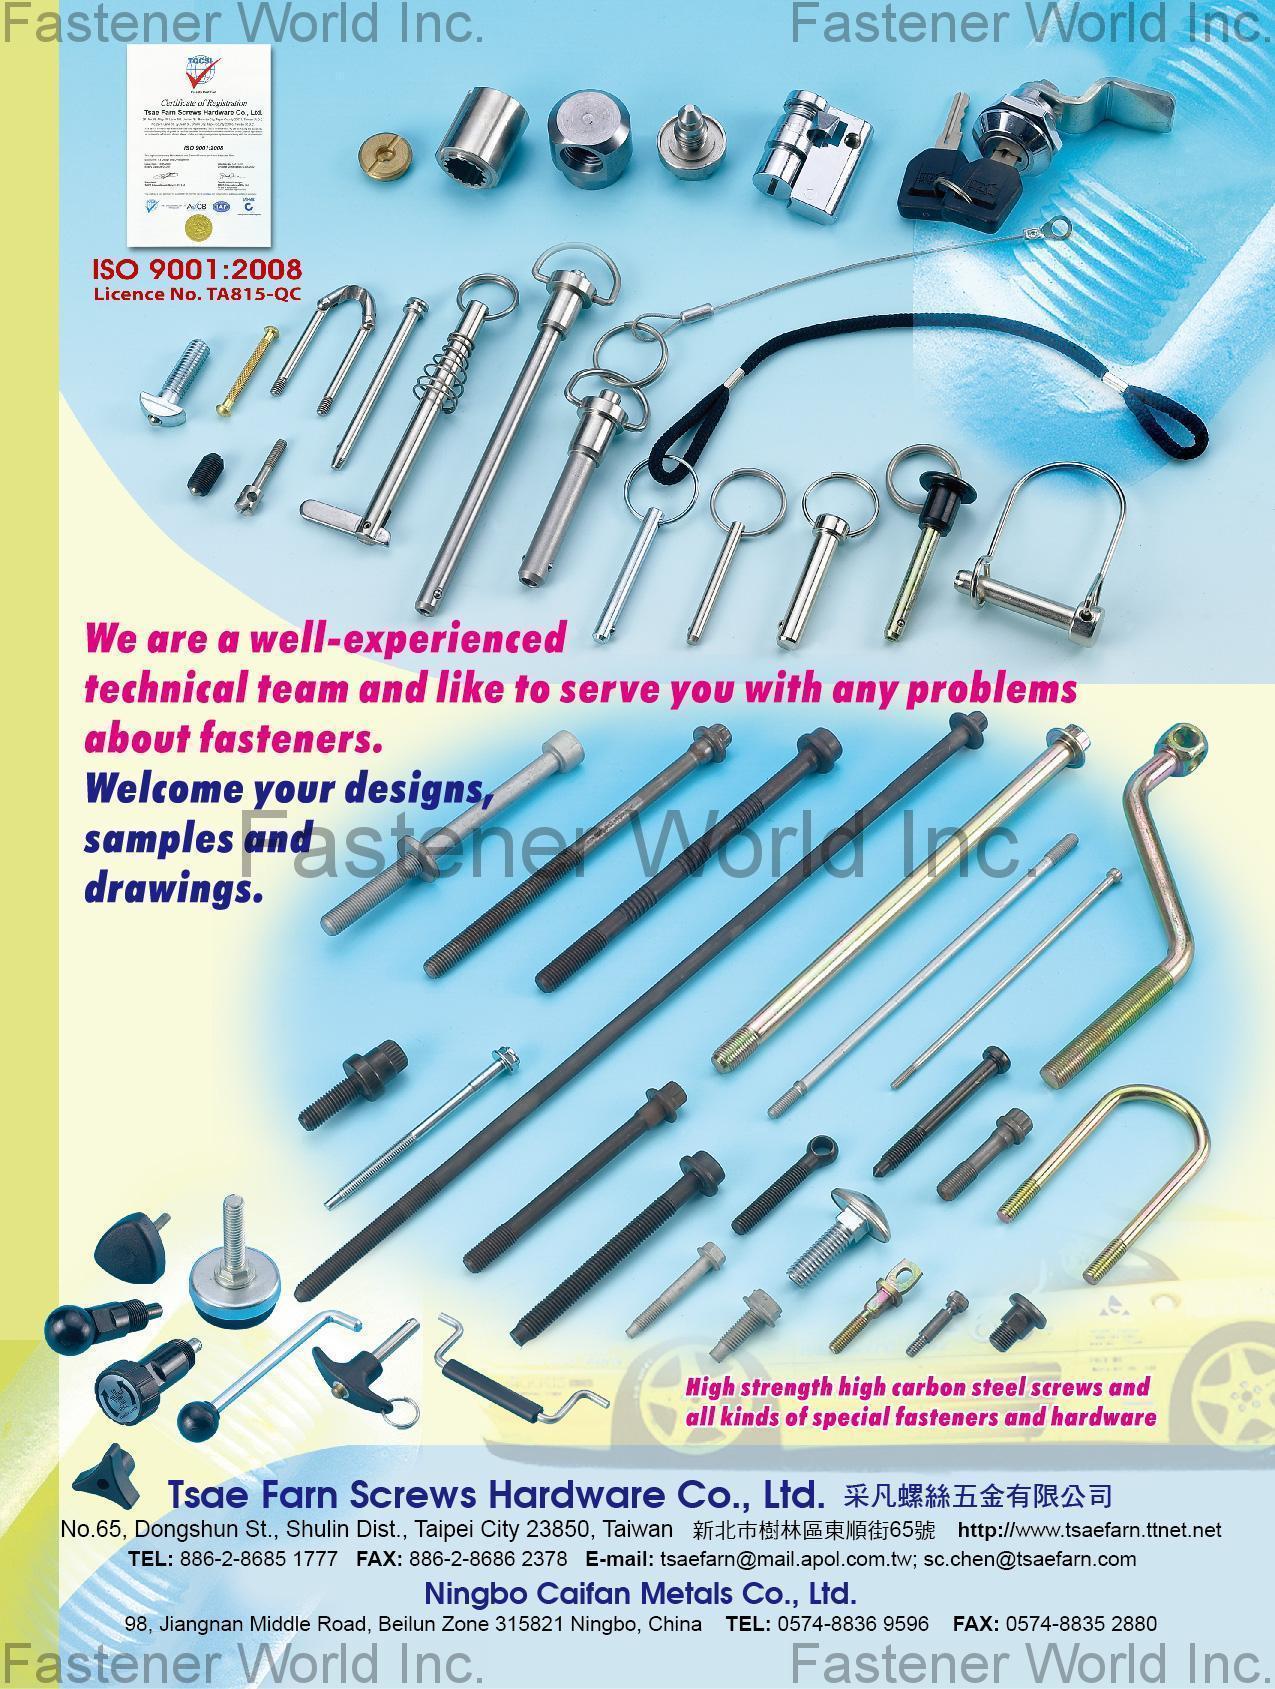 TSAE FARN SCREWS HARDWARE CO., LTD. , Clevis Pin, Screws, Special Screws, General Hardware, Screwdrivers, Toilet Plungers, Ball Plunger, Door & Window Latches, Spring Pin, Press Processing Products, Furniture Bolts, Special Nuts, Lanyards, Nuts, Bolts , Carbon Steel Screws